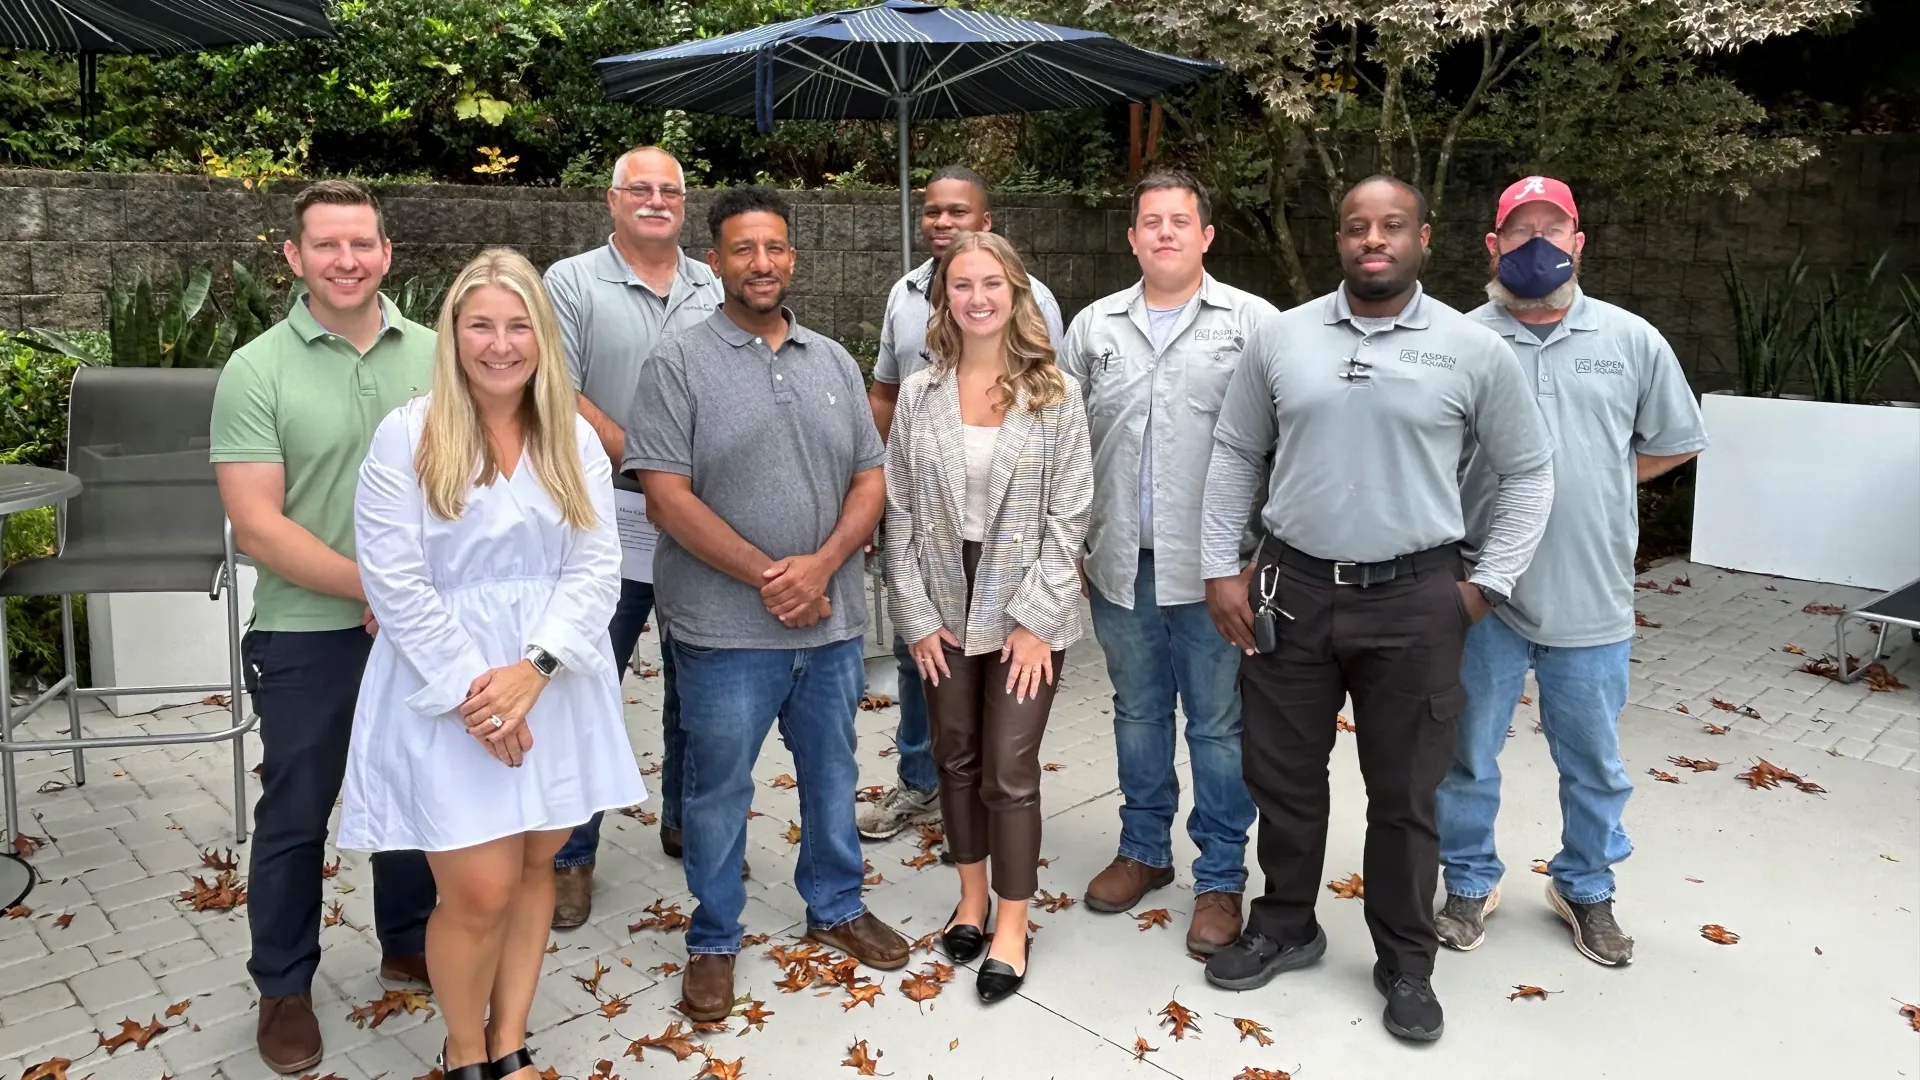 A group of maintenance workers and two members of our recruiting team pose for a photo together after their Recruiting Operations Training session.